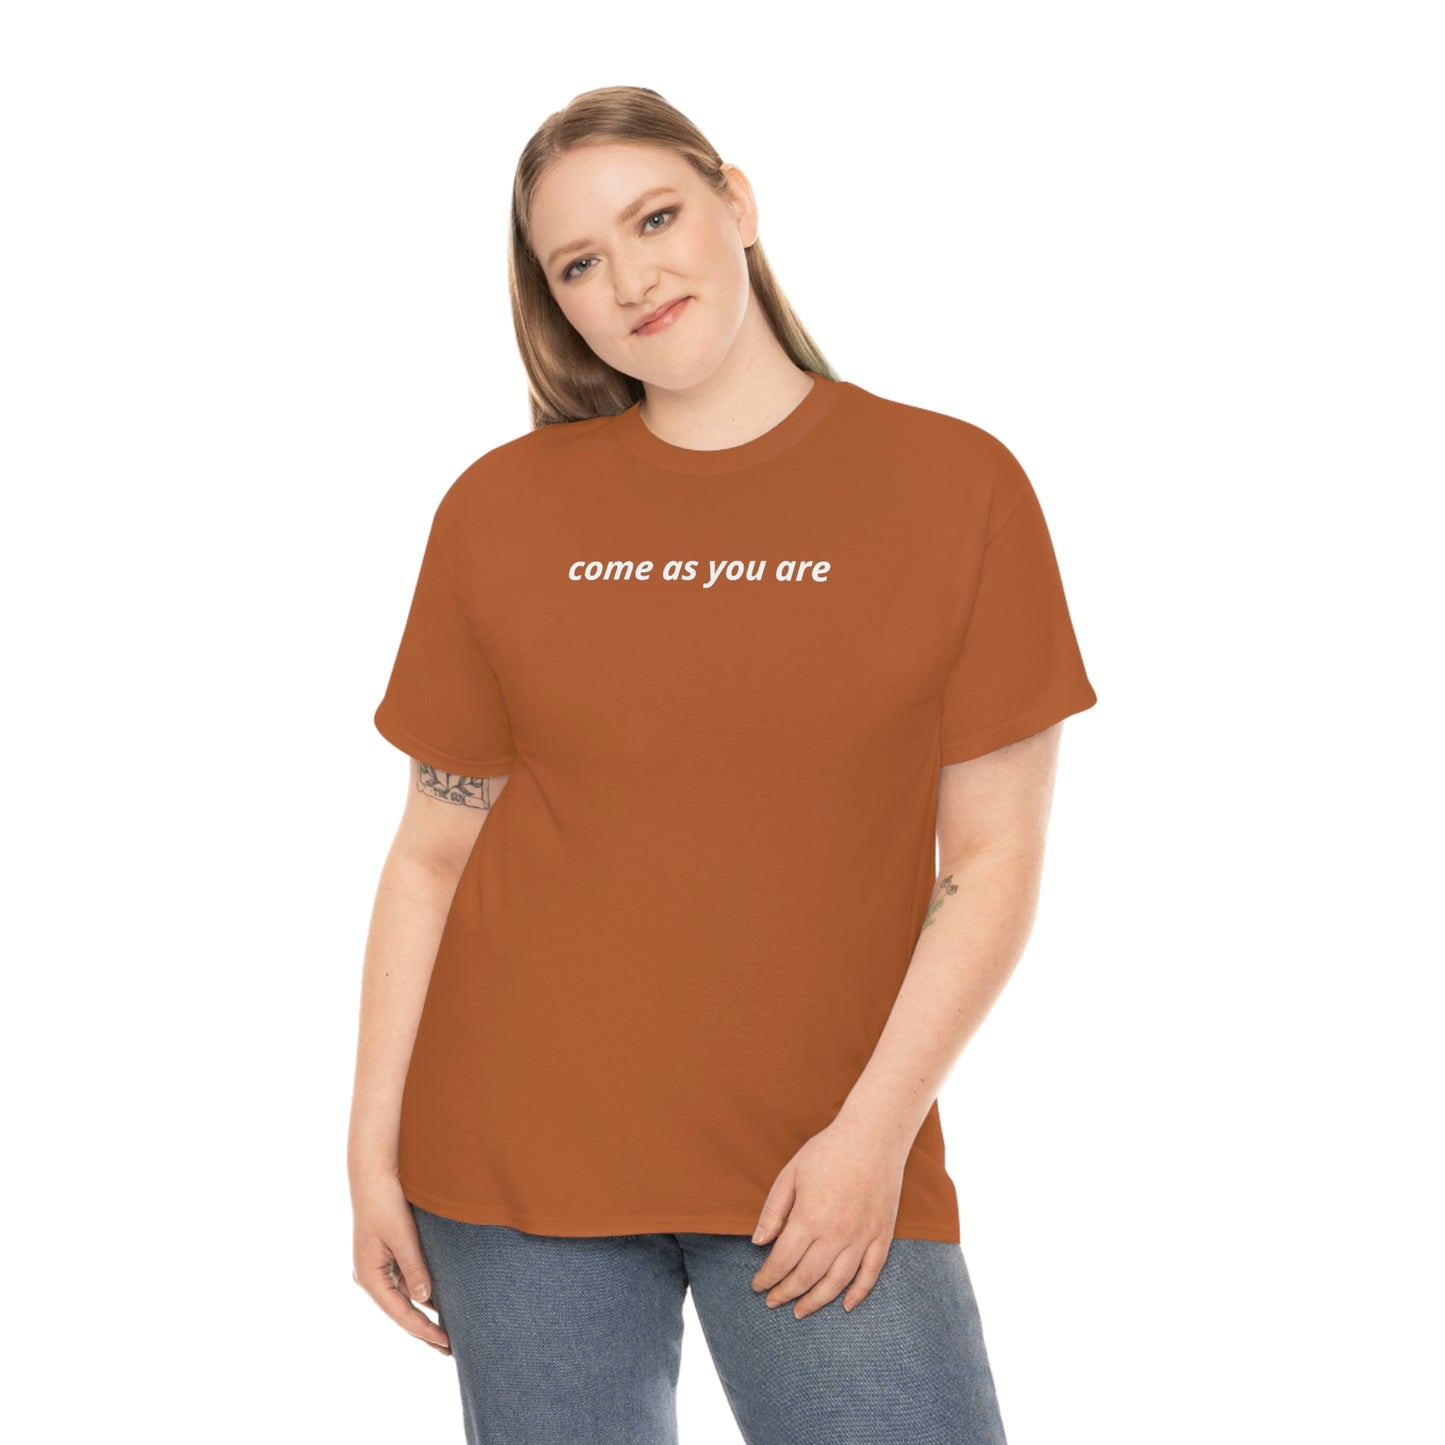 Come As You Are - Shirt